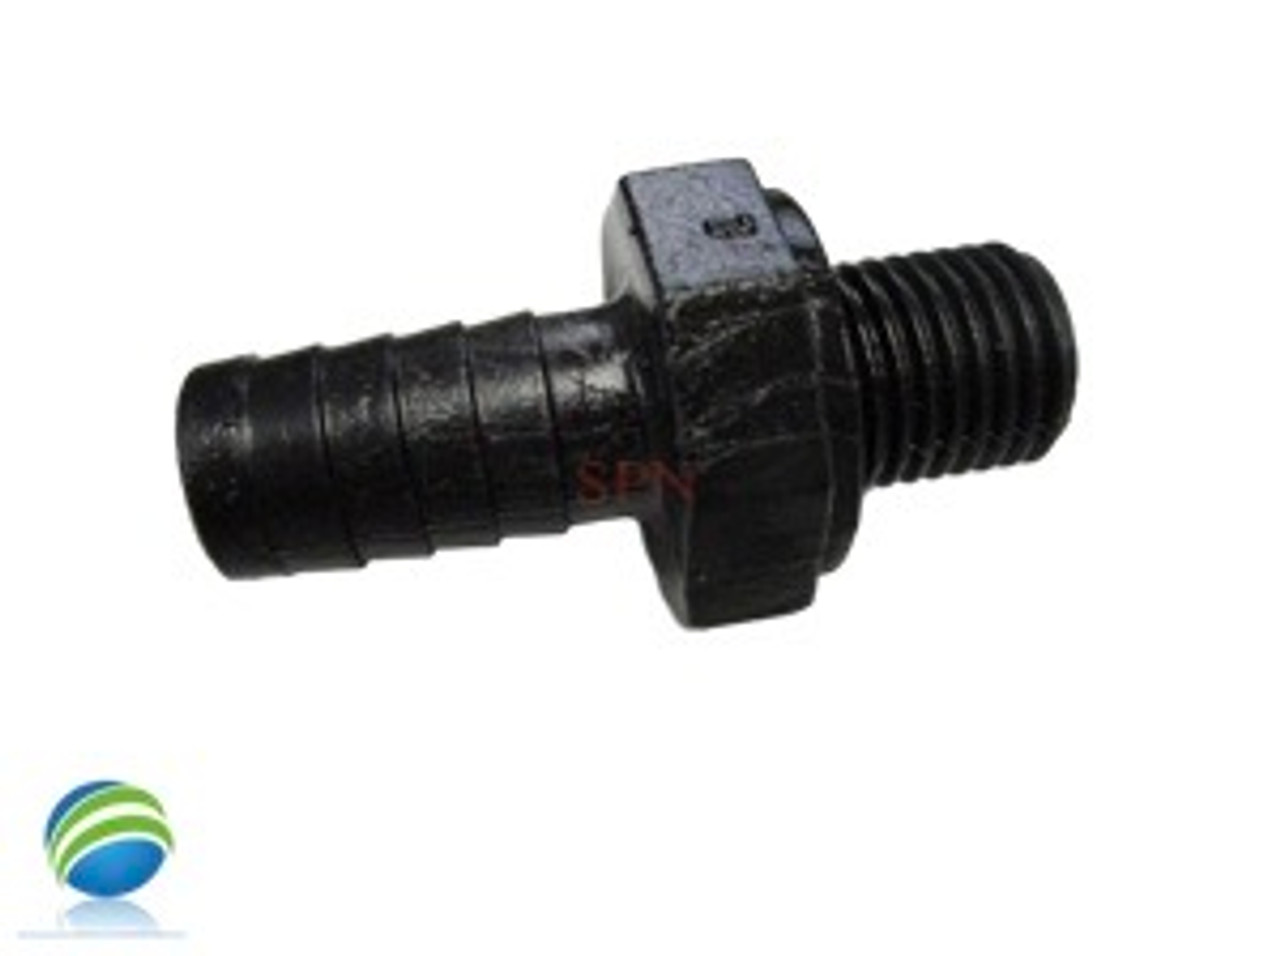 Barb Adapter, 3/8"b x 1/4"mpt Pump Wet End Face fits Waterway